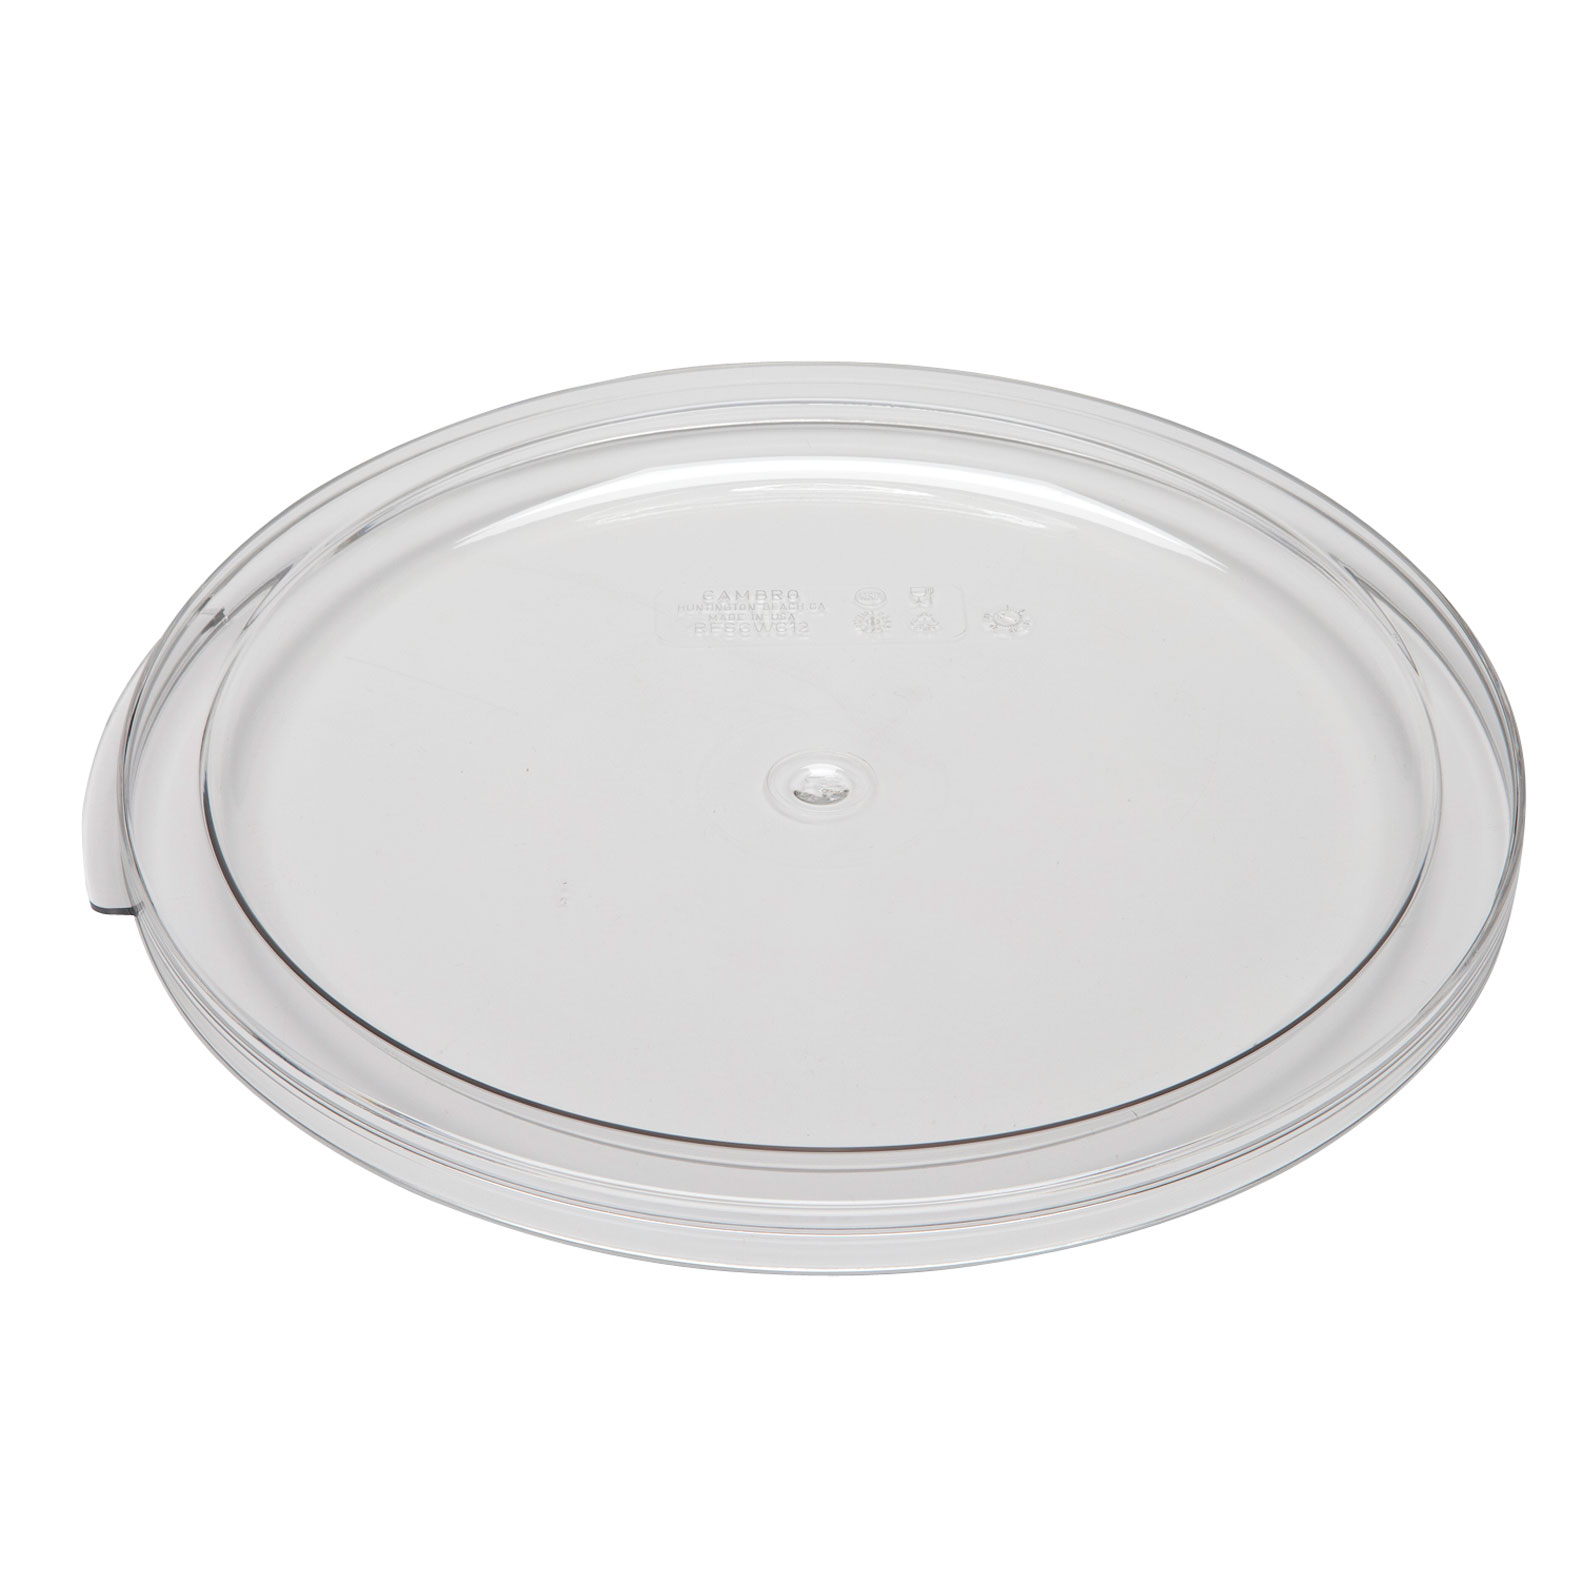 12, 18, &amp; 22 qt CLEAR LID FOR ROUND FOOD STORAGE CONTAINER,